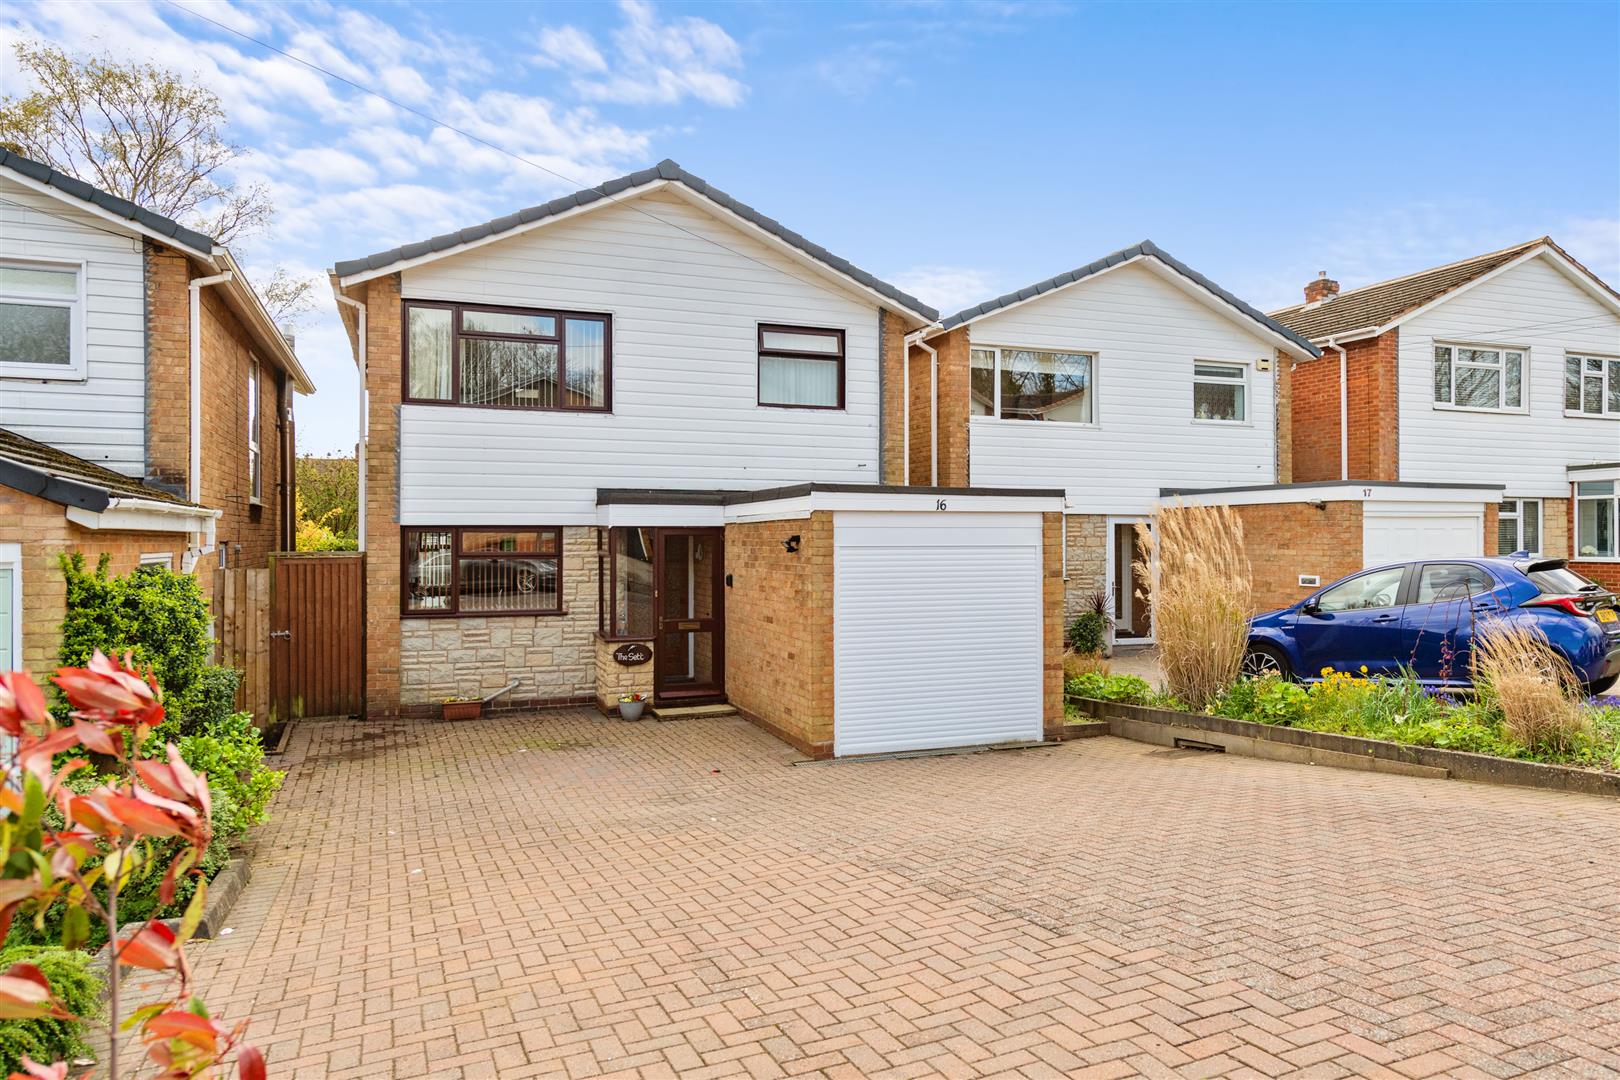 3 bed detached house for sale in Sambourn Close, Solihull  - Property Image 1